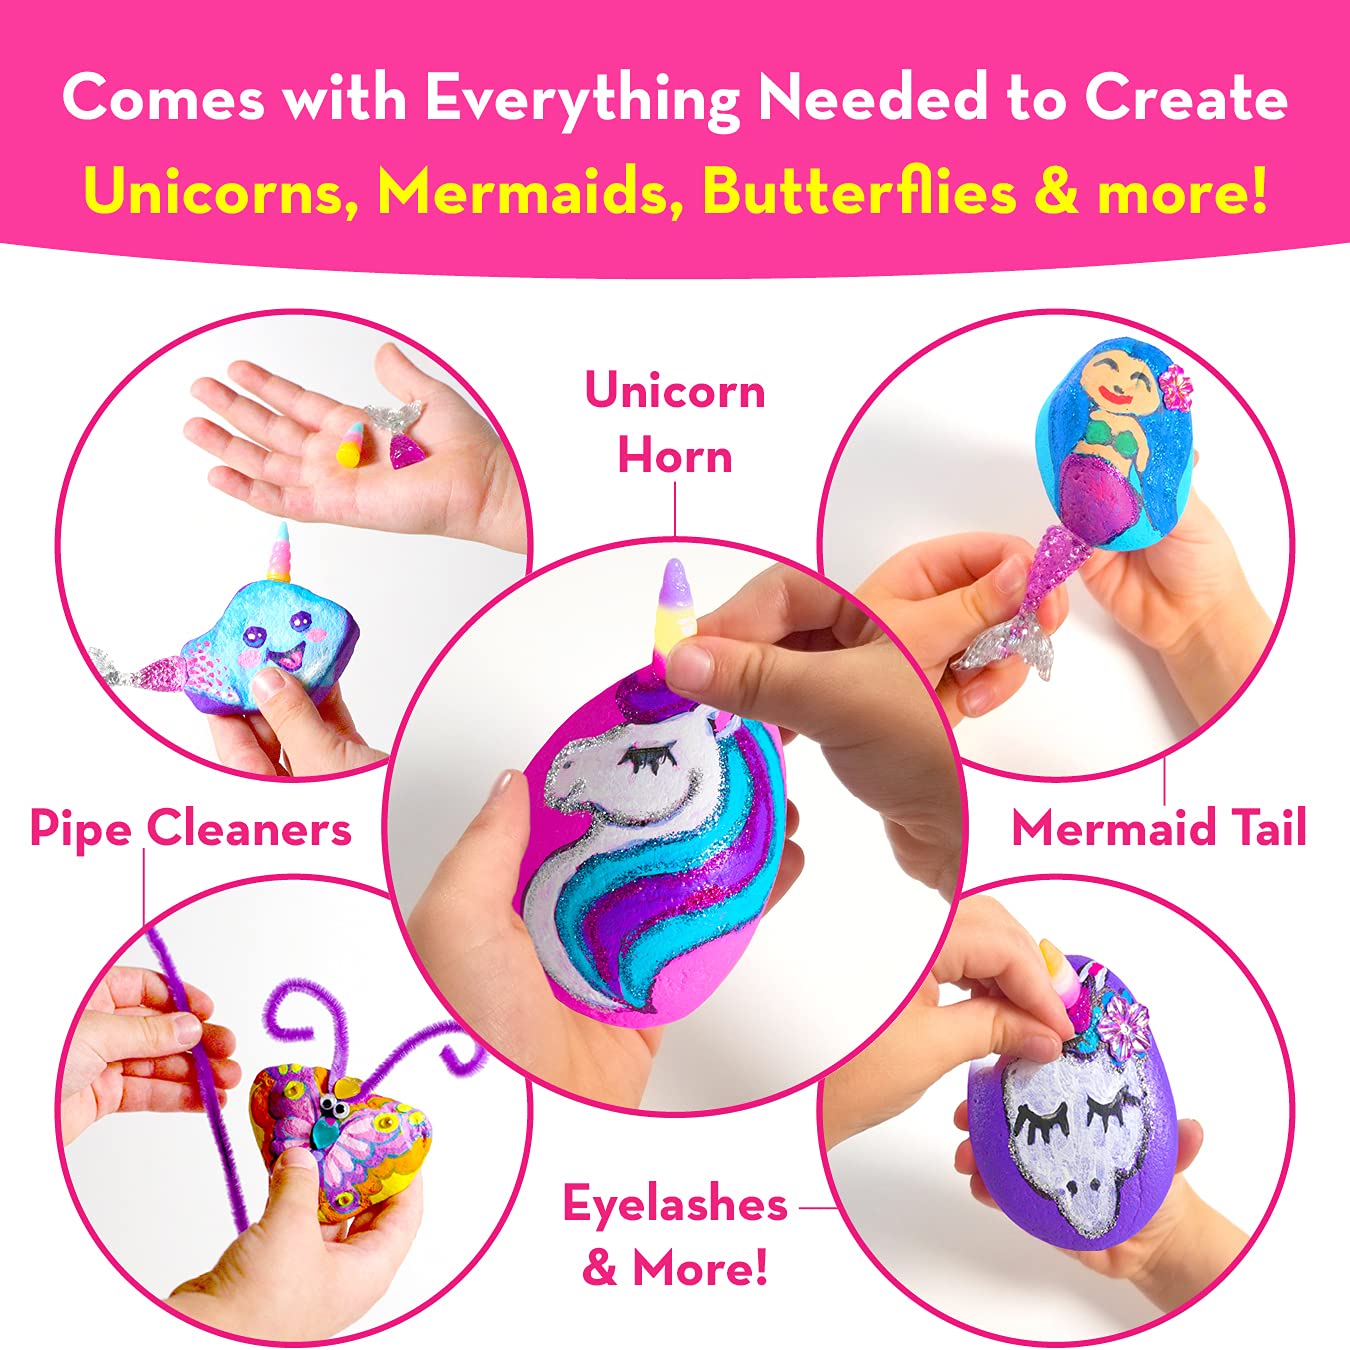 Rock Painting Kit for Kids with Unicorn Horns, Mermaid Tails and Butterfly Accessories - Includes Step-by-Step Rock Art Lessons for Girls and Boys All Ages - Arts and Crafts Paint Kits Gifts and Toys